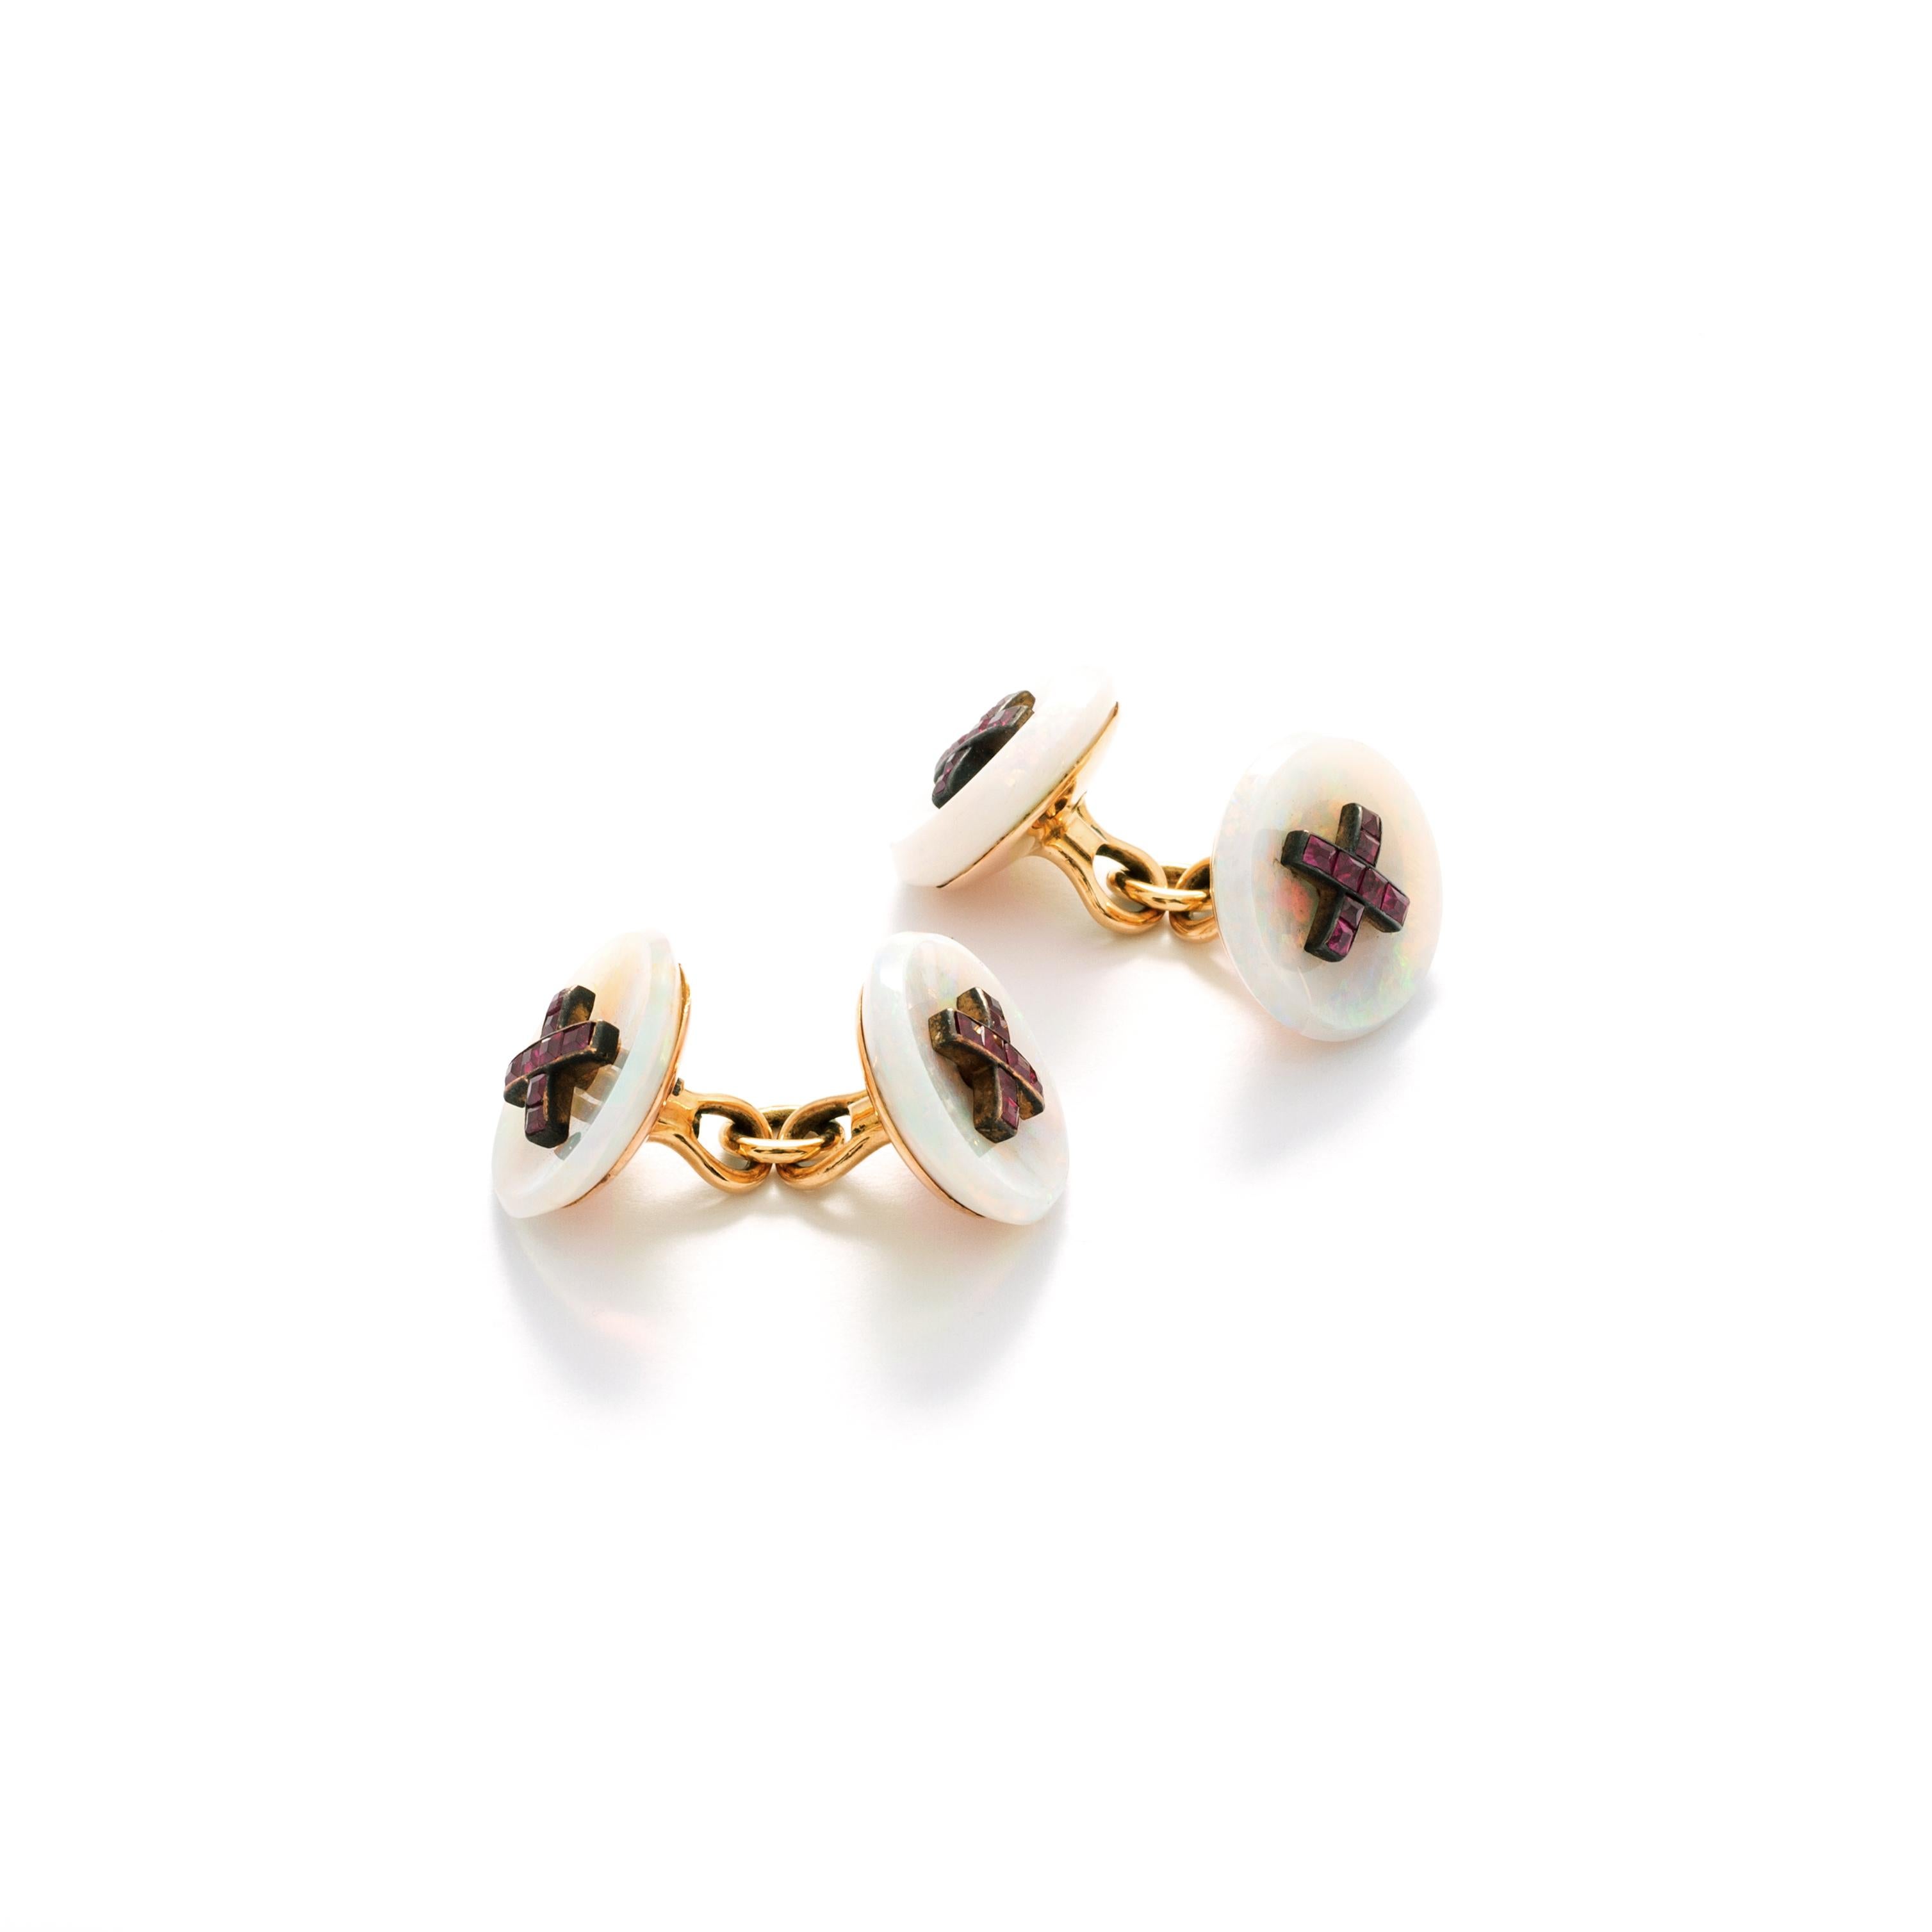 Ruby, Mother of Pearl and Gold Cufflinks.
Diameter: 1.80 cm.
Chain length: 2.00 cm.